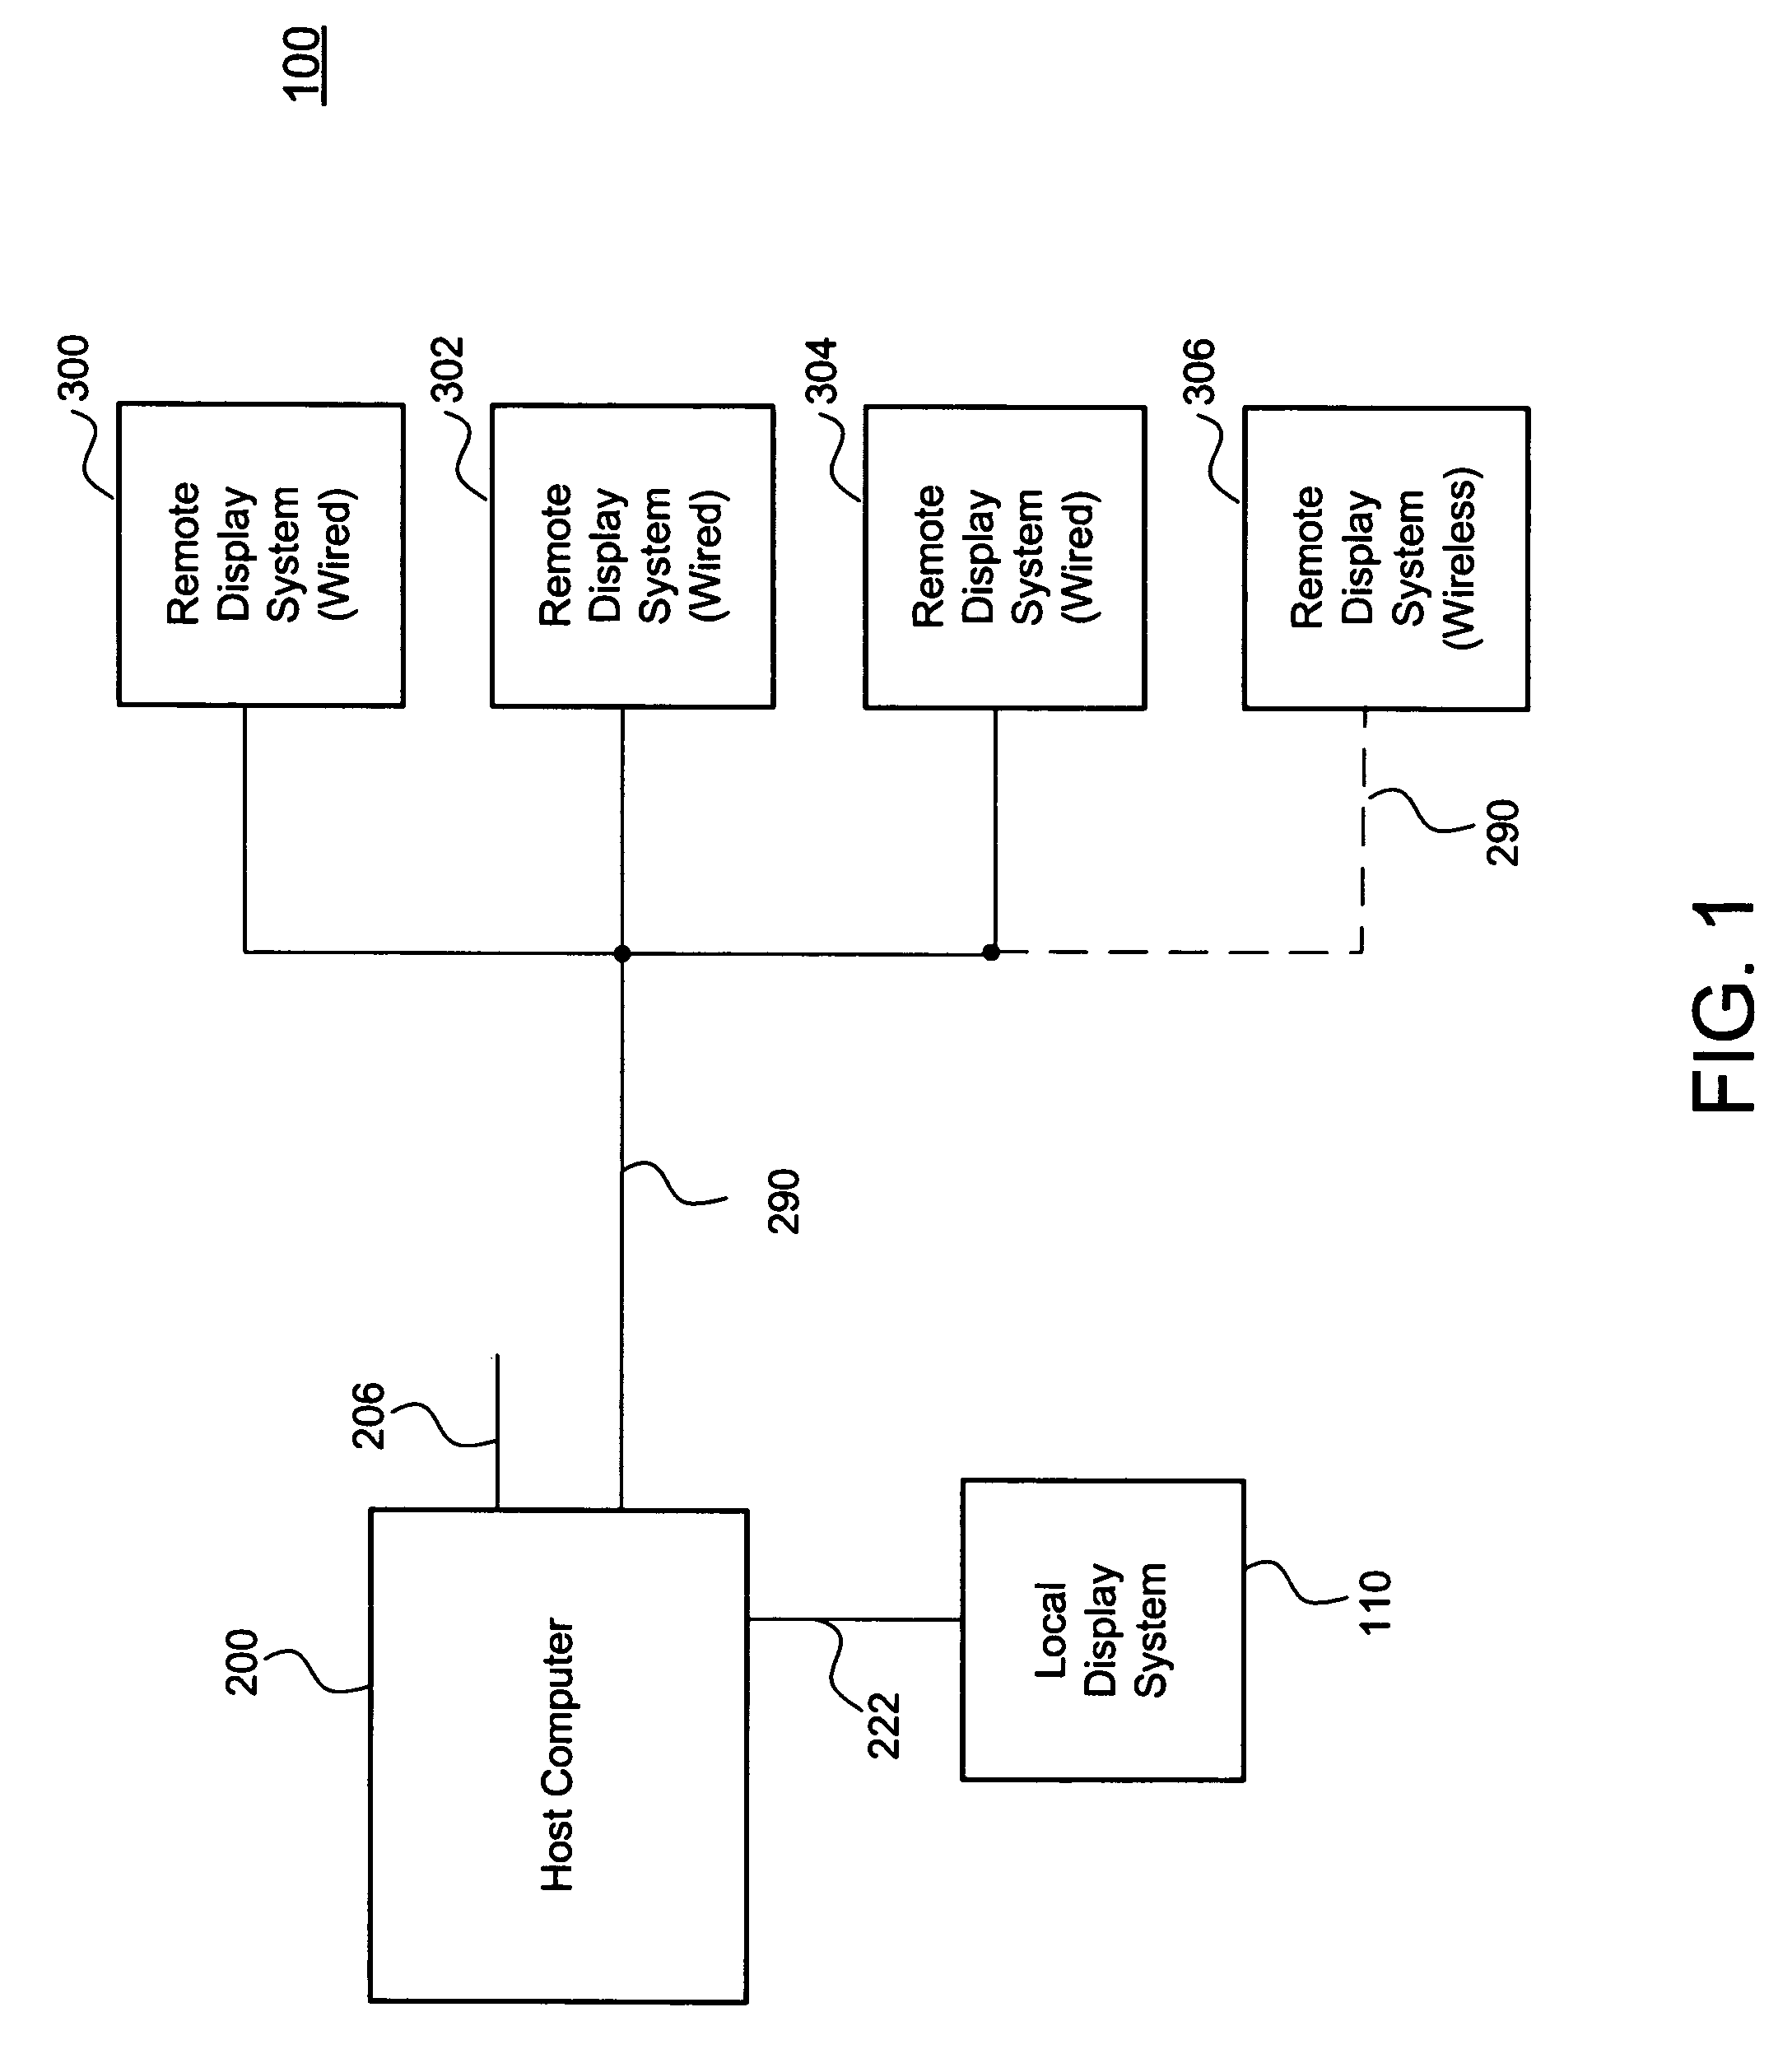 Computer system for supporting multiple remote displays